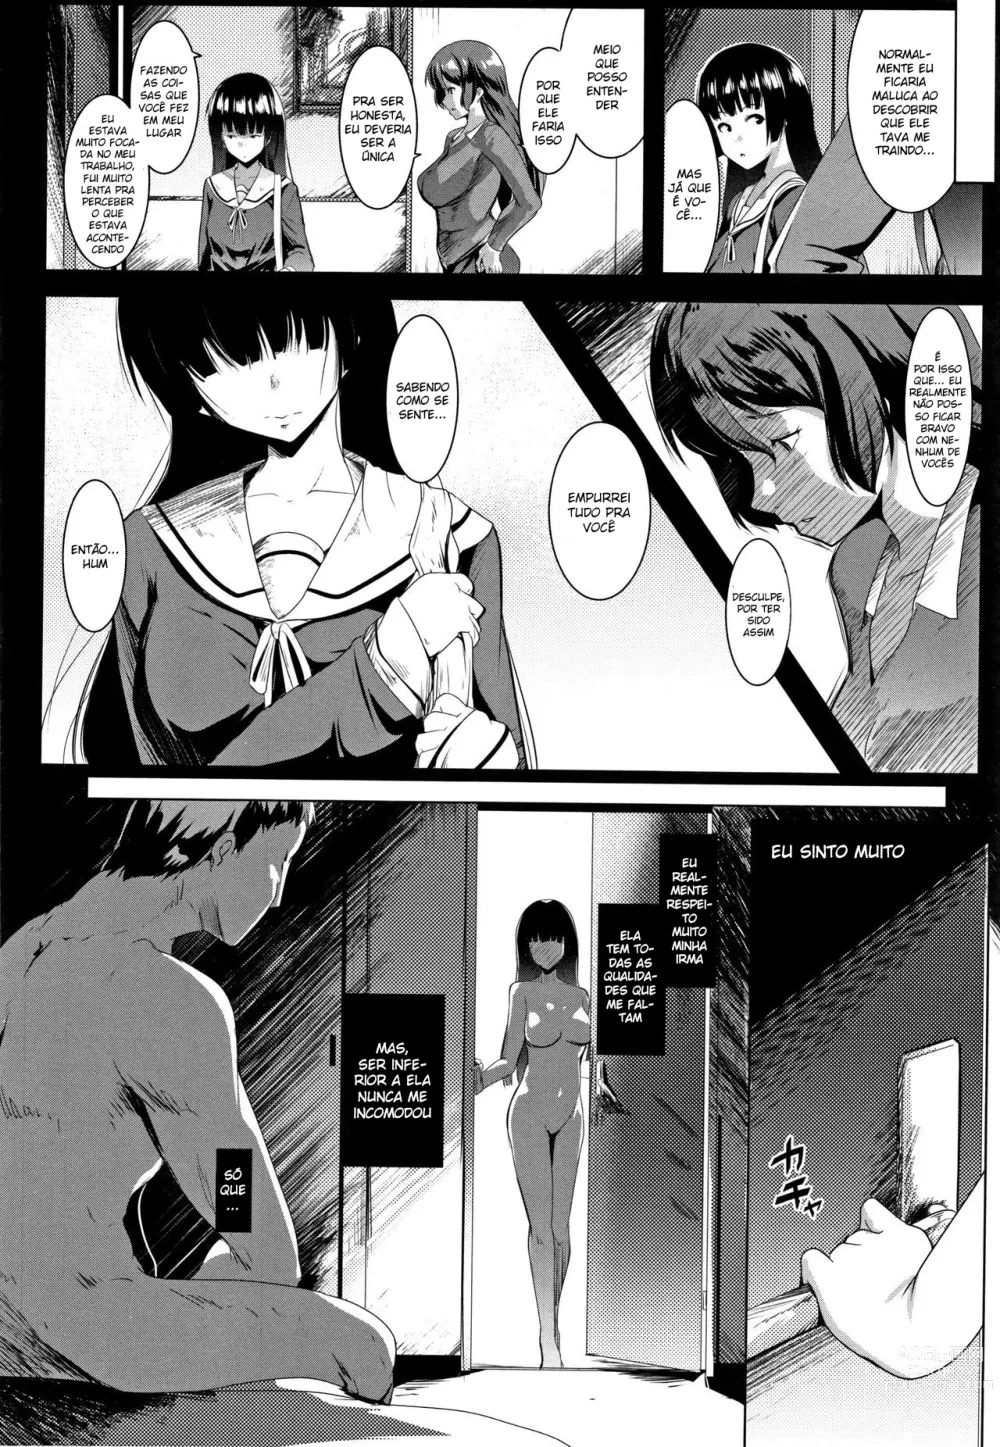 Page 10 of manga Sex-guidance with my precious sister in-law